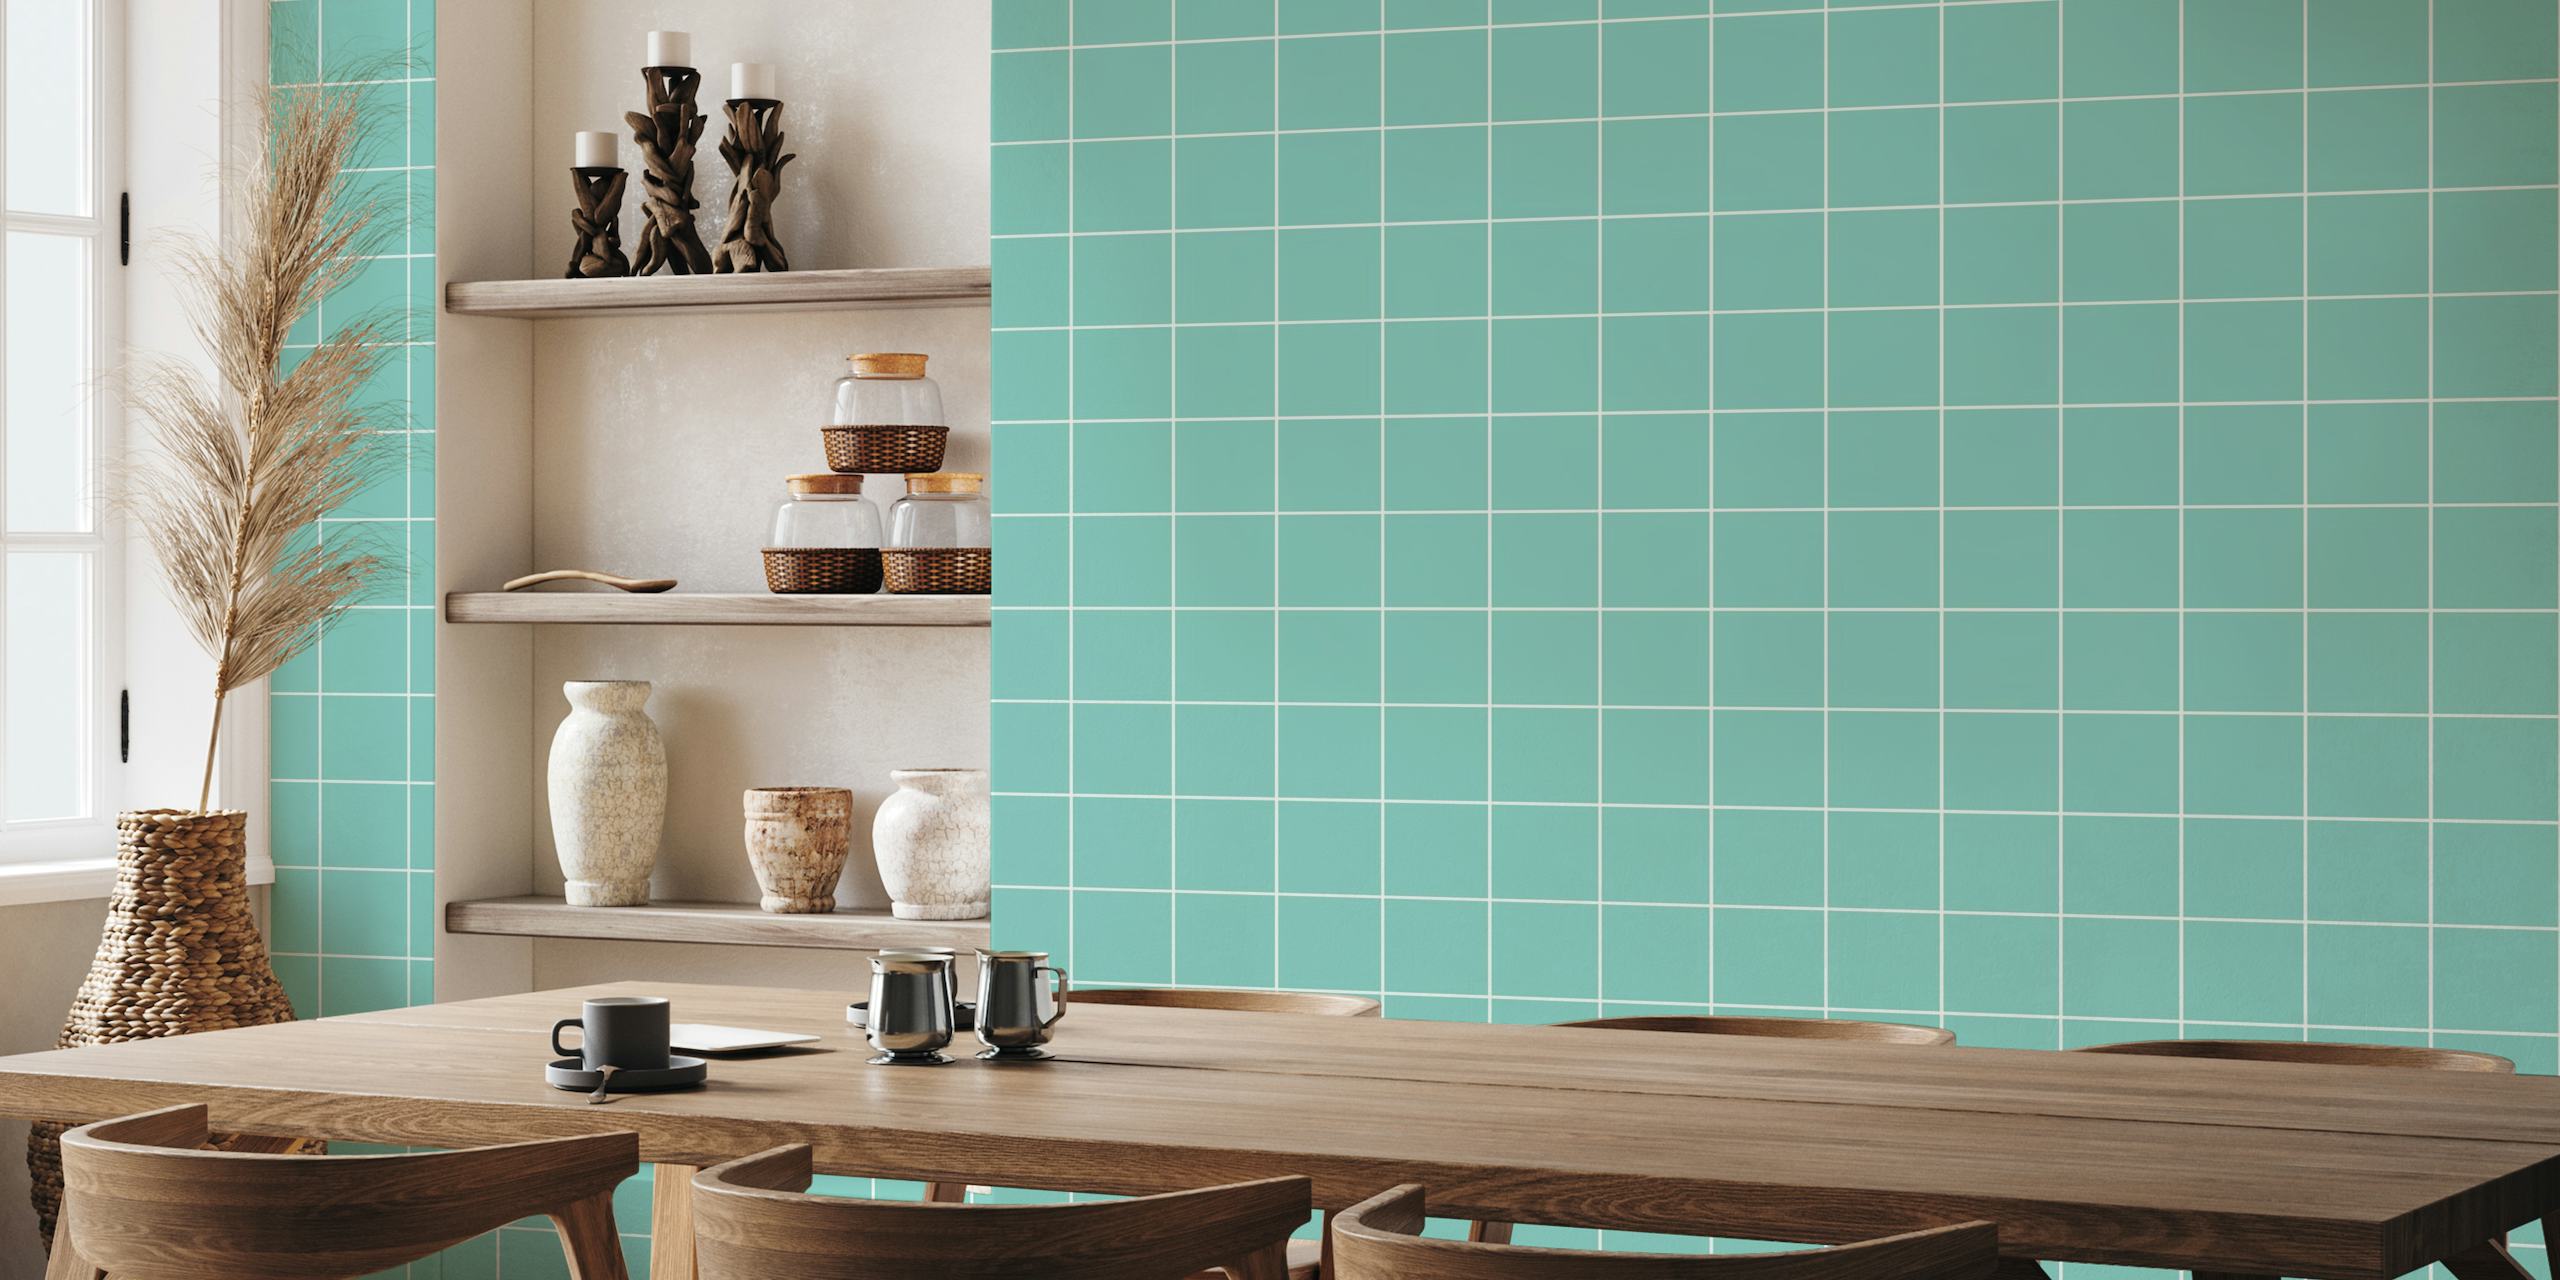 Turquoise wall mural with white grid pattern